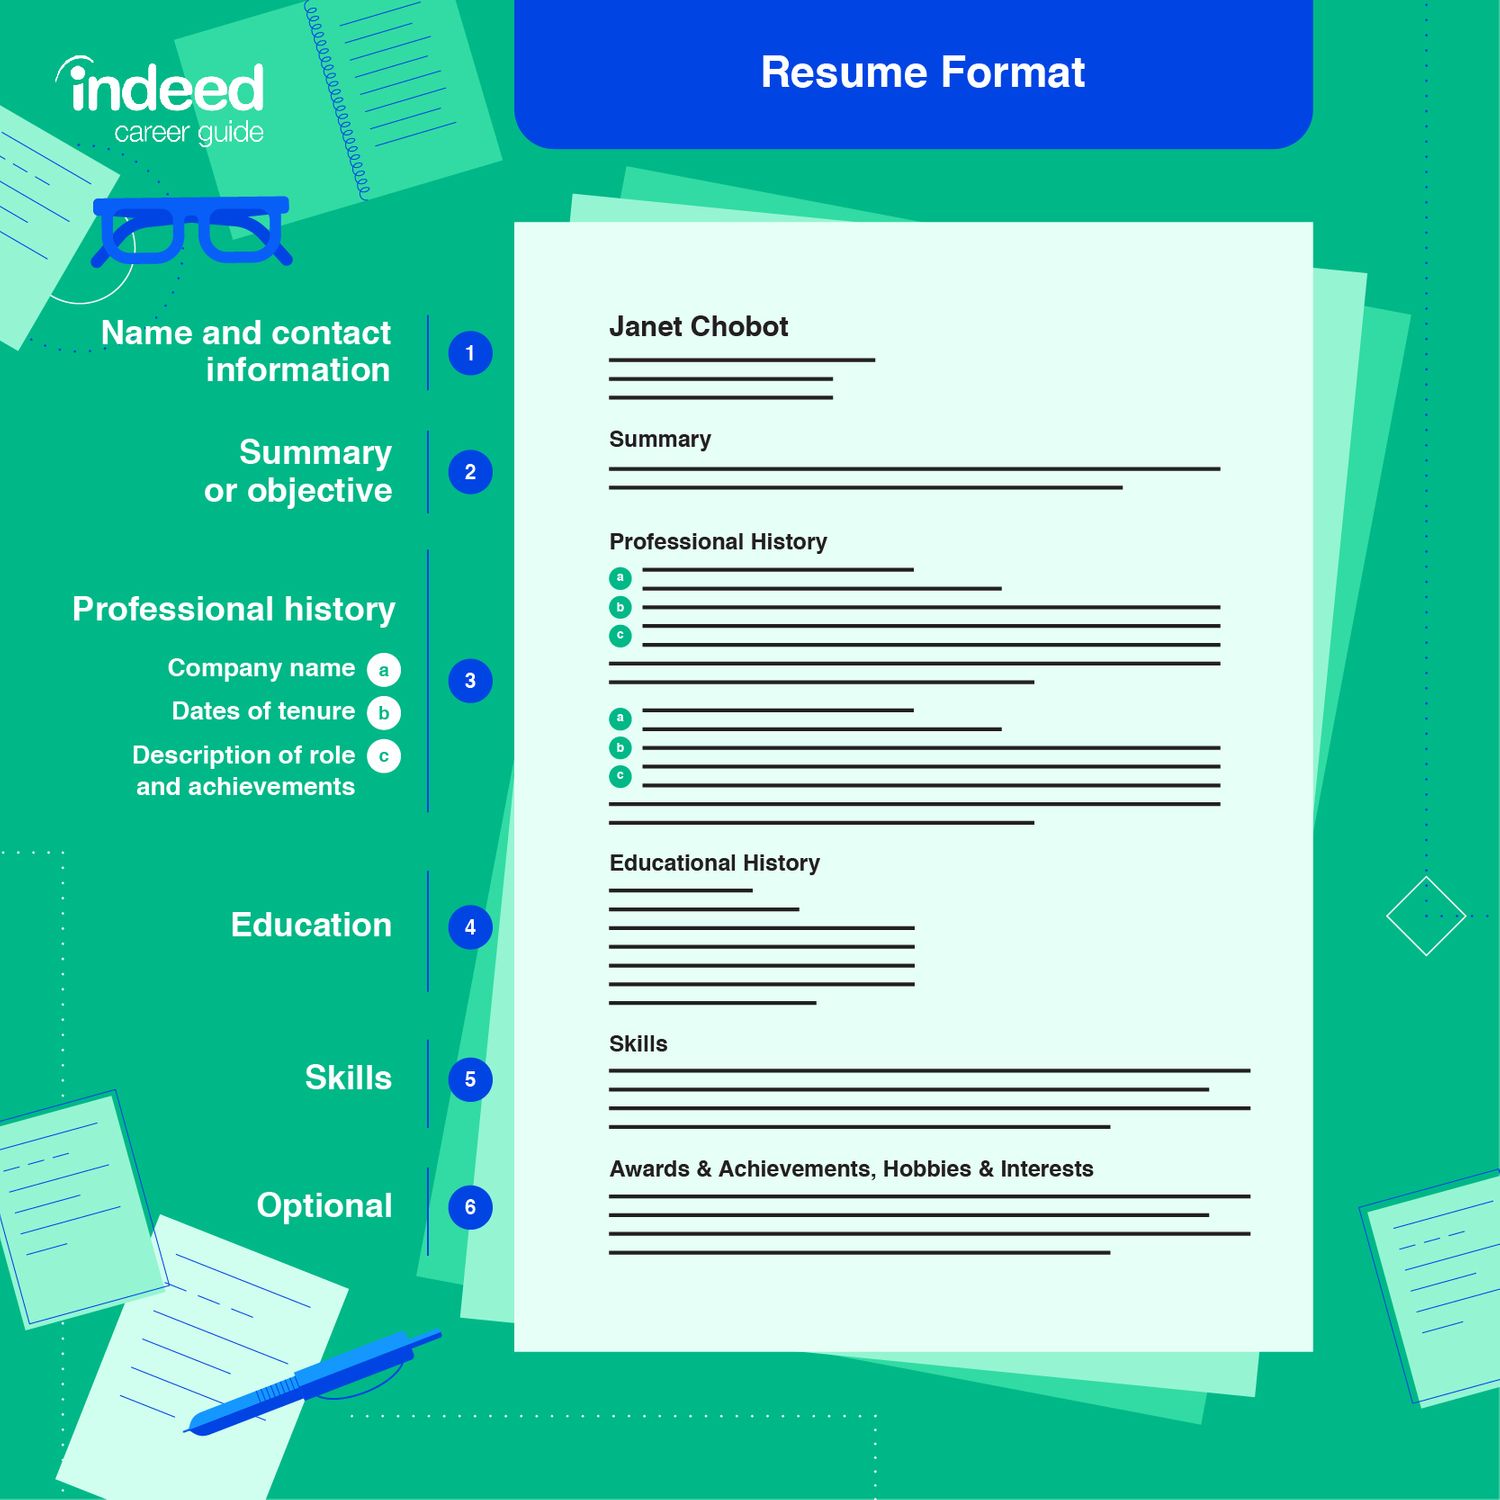 How To Write a Volunteer Resume (With Sample and Tips)  Indeed.com